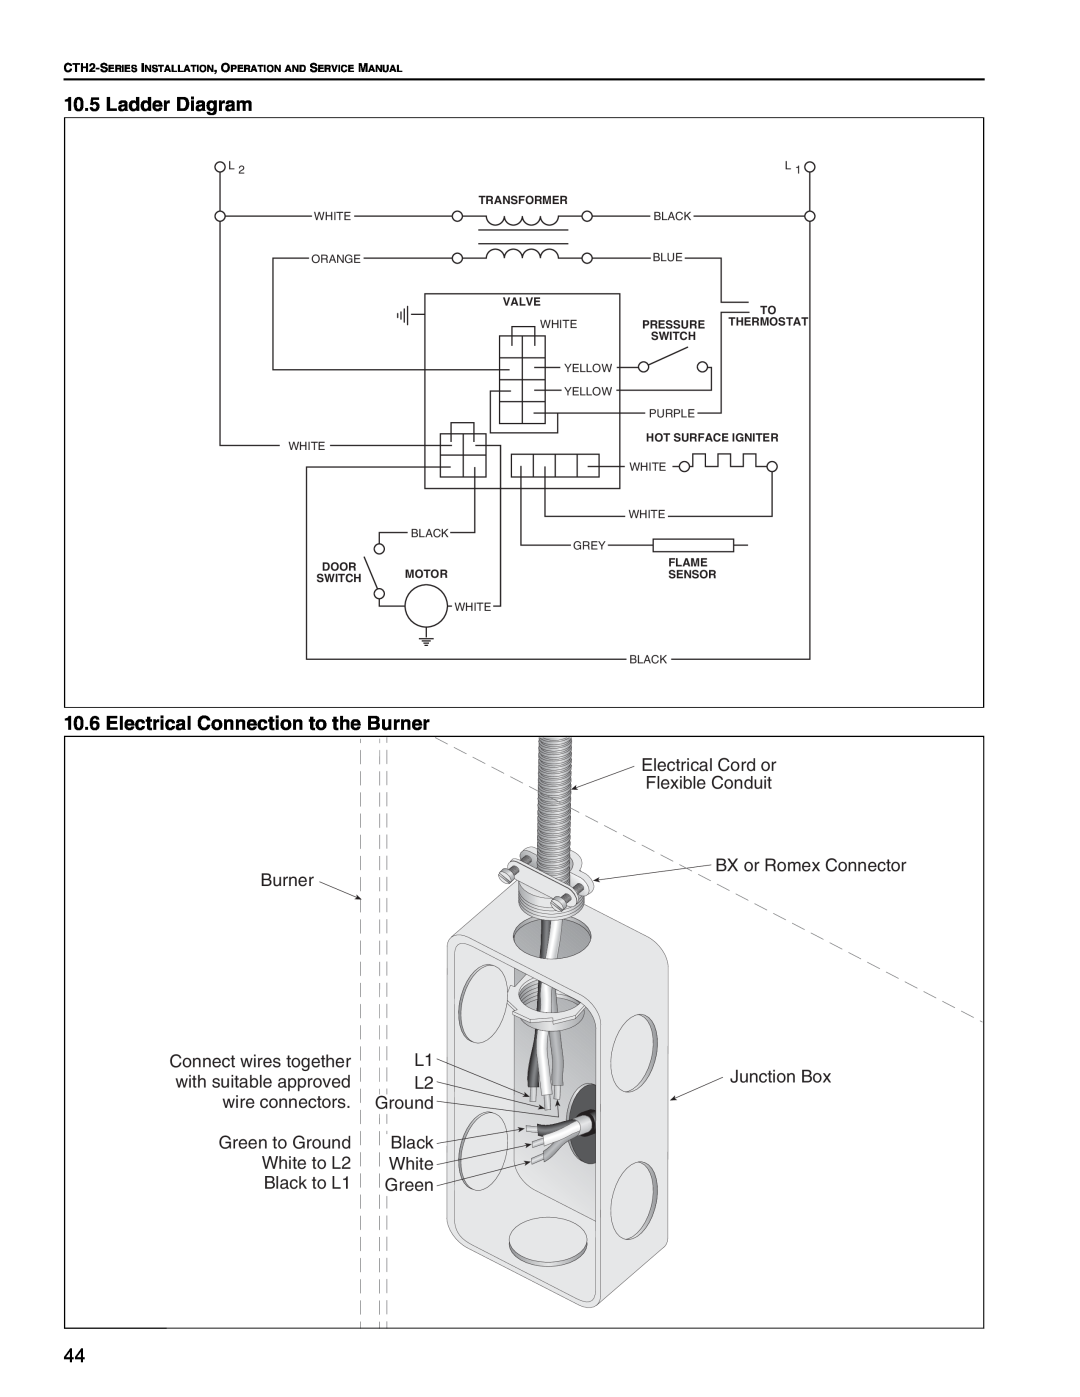 Roberts Gorden CTH2-100, CTH2-125, CTH2-80, CTH2-150, CTH2-175 Ladder Diagram, Electrical Connection to the Burner 